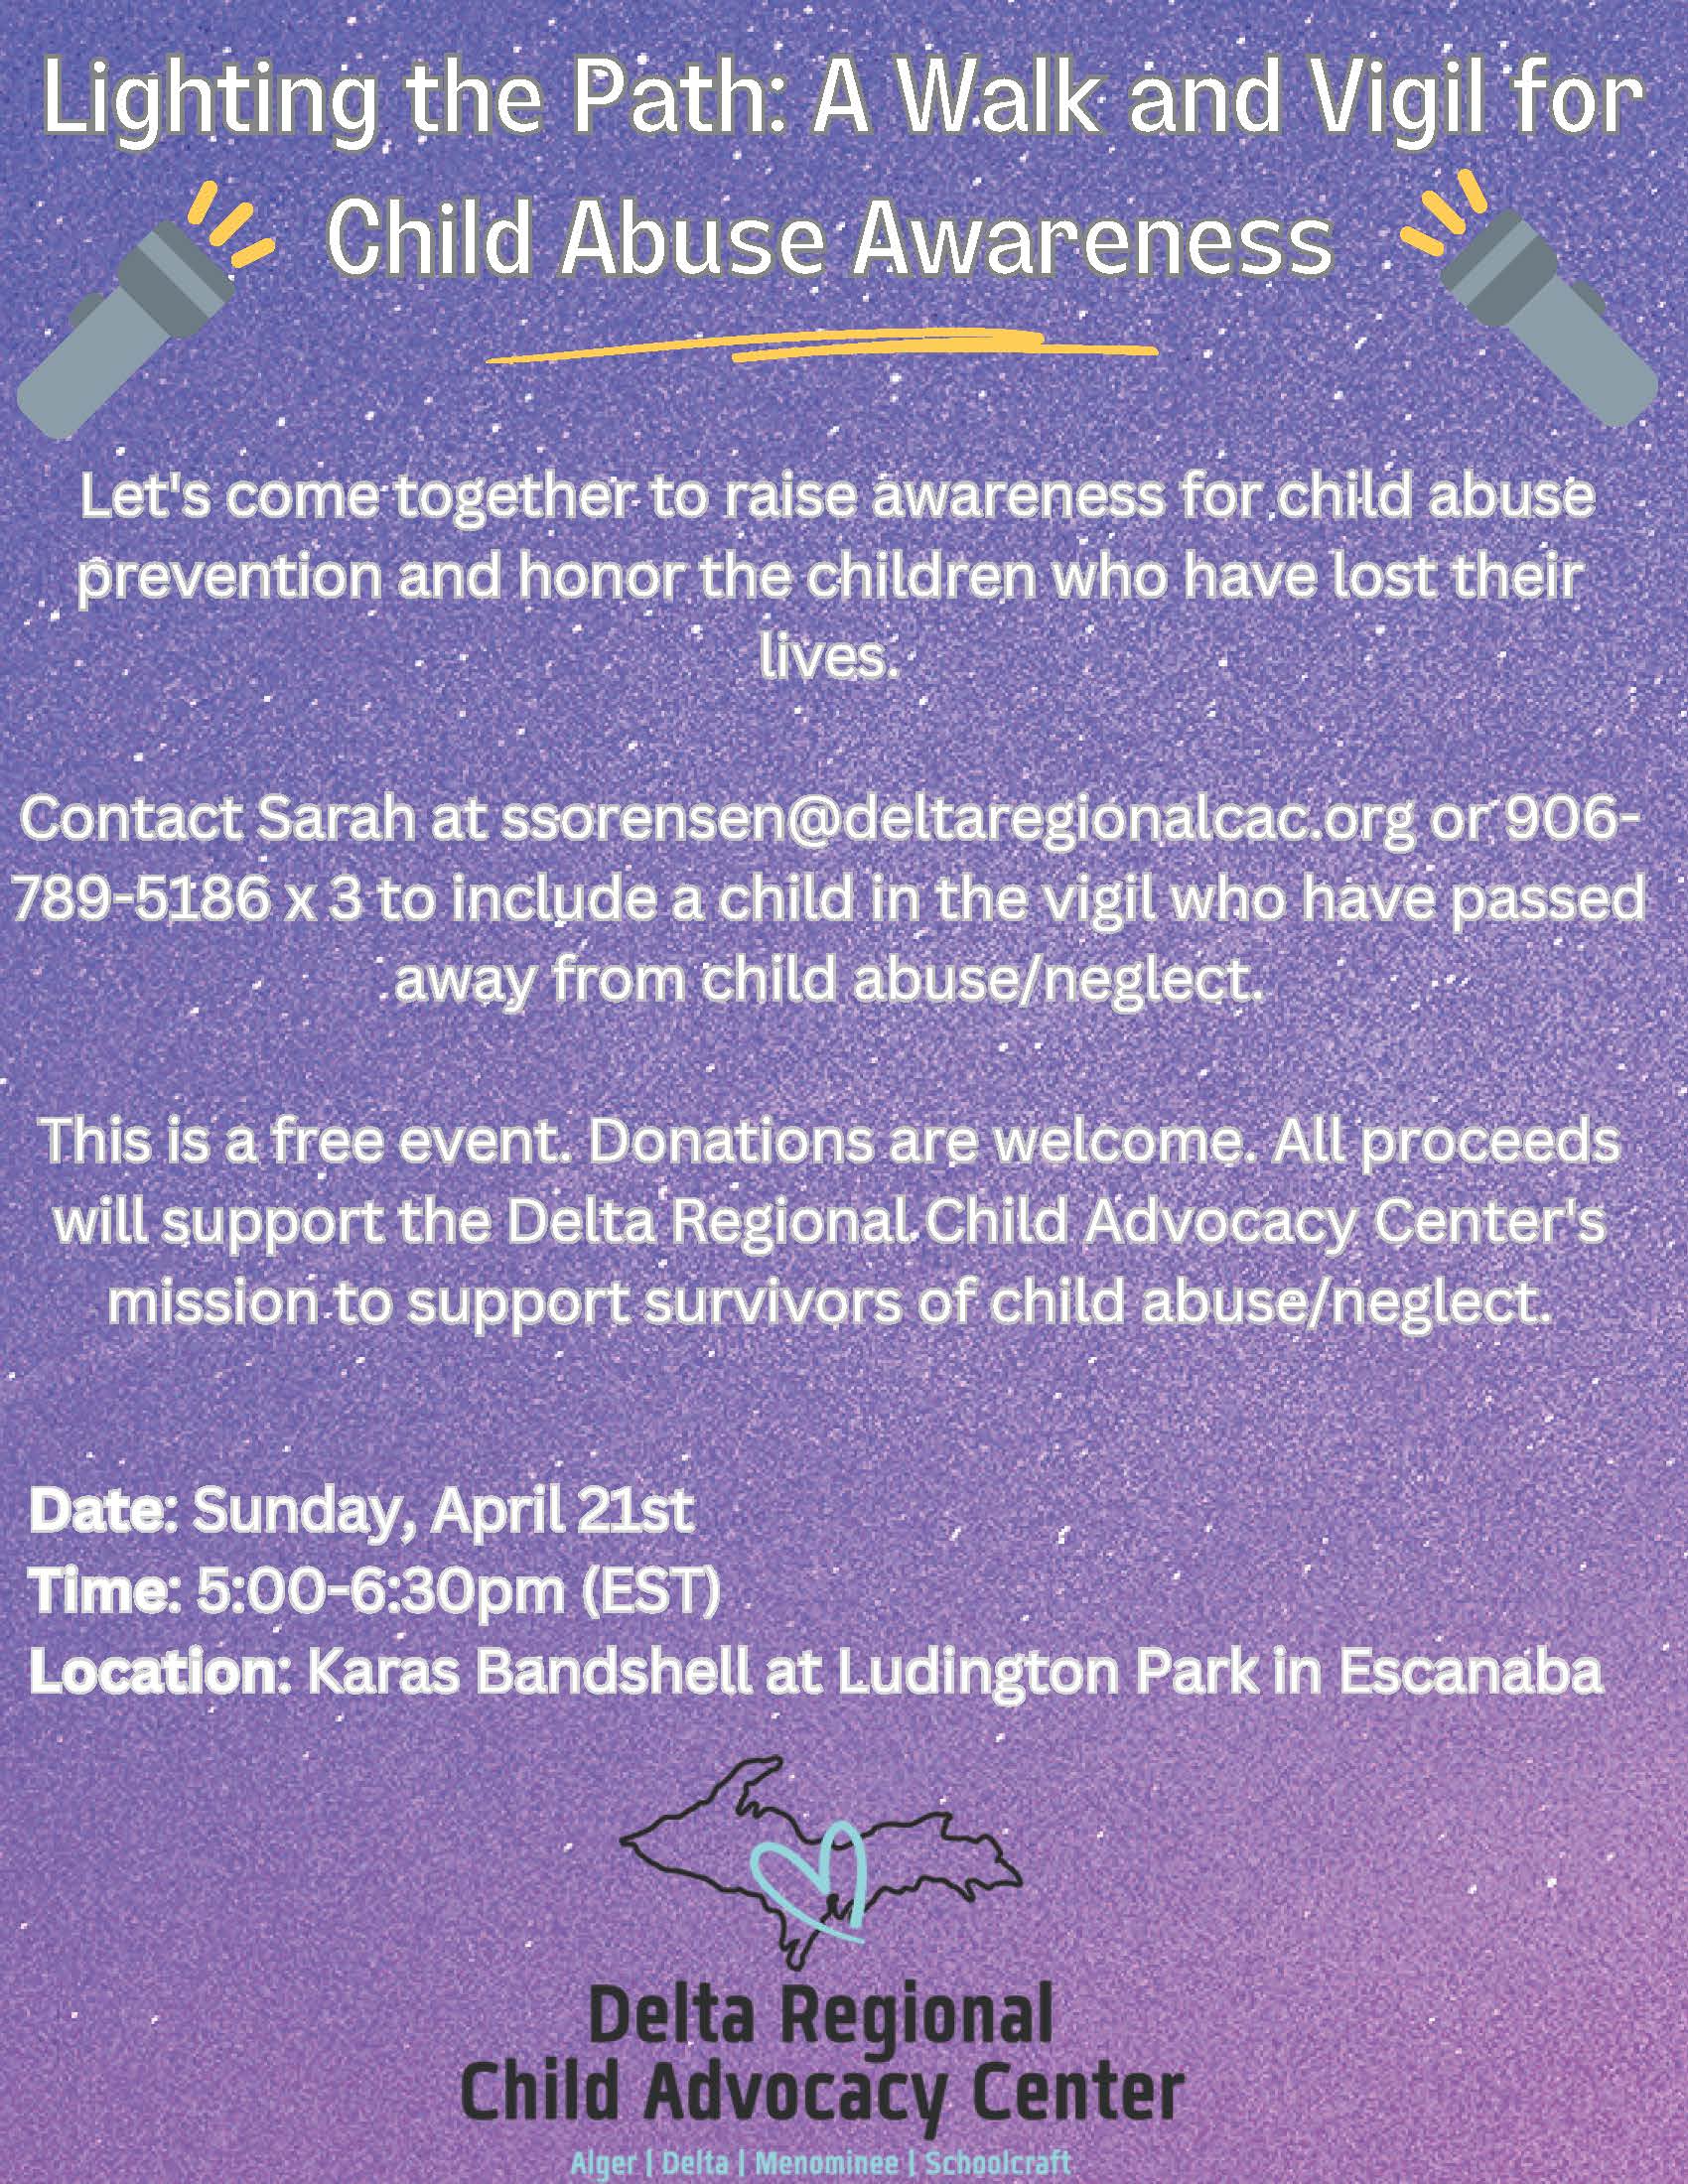 Lighting the Path: A Walk and Vigil for Child Abuse Awareness. Let's come together to reaise awarenss for child abuse prevention and honor the children who have lost their lives. Contact Sarah at ssorensen@deltaregionalcac.org or 906-789-5186 x 3 to include a child in the vigil who have passed away from child abuse/neglect. This is a free even. Donations are welcome. All proceeds will suppor the Delta Regional Chidl Advocacy Center's mission to supportsurvivors of child abuse/neglect. Date: Sunday, April 21st; Time: 5 pm -6:30 pm (EST) Location: Karas Bandshell at Ludington Park in Escanaba. Delta Regional Child Advocacy Center (serving Alger, Delta, Menominee, Schoolcraft)